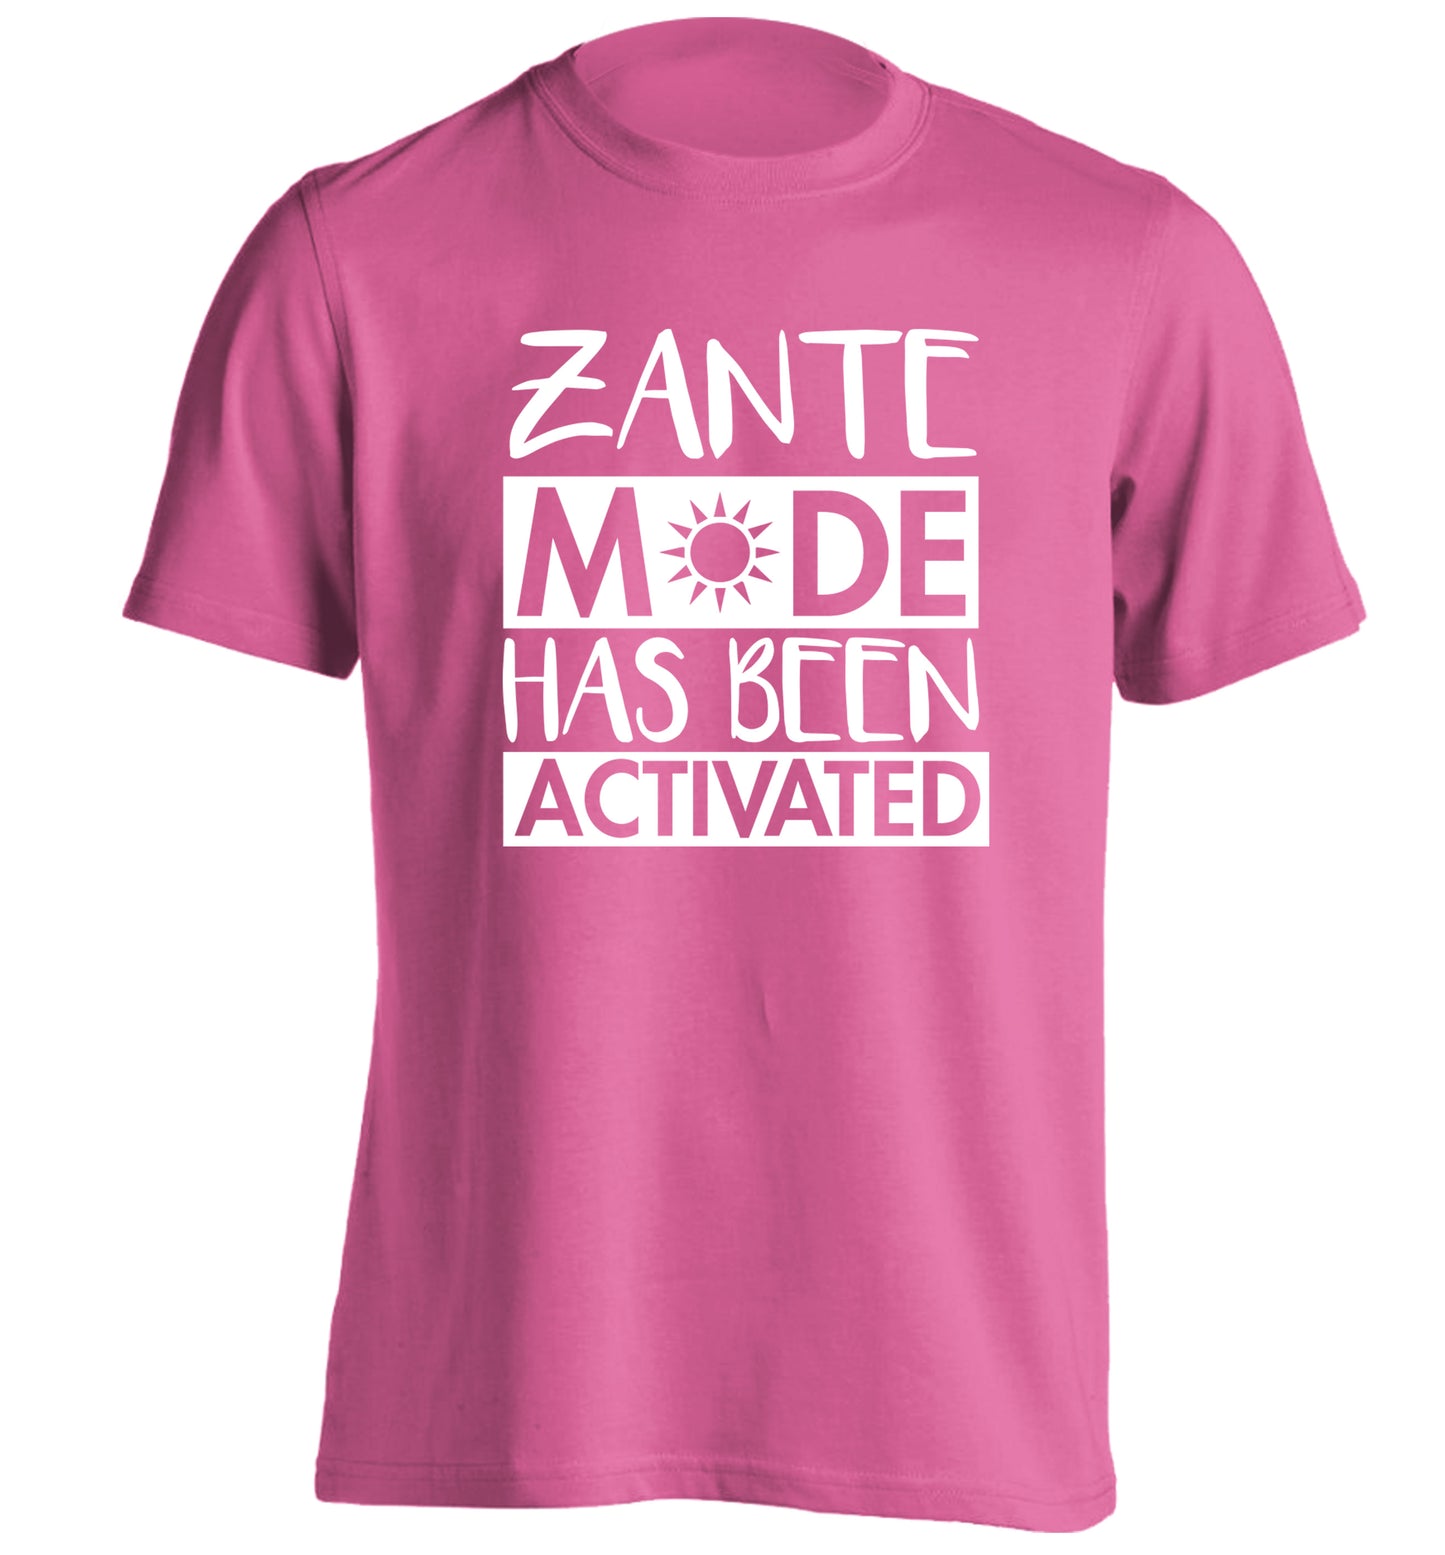 Zante mode has been activated adults unisex pink Tshirt 2XL